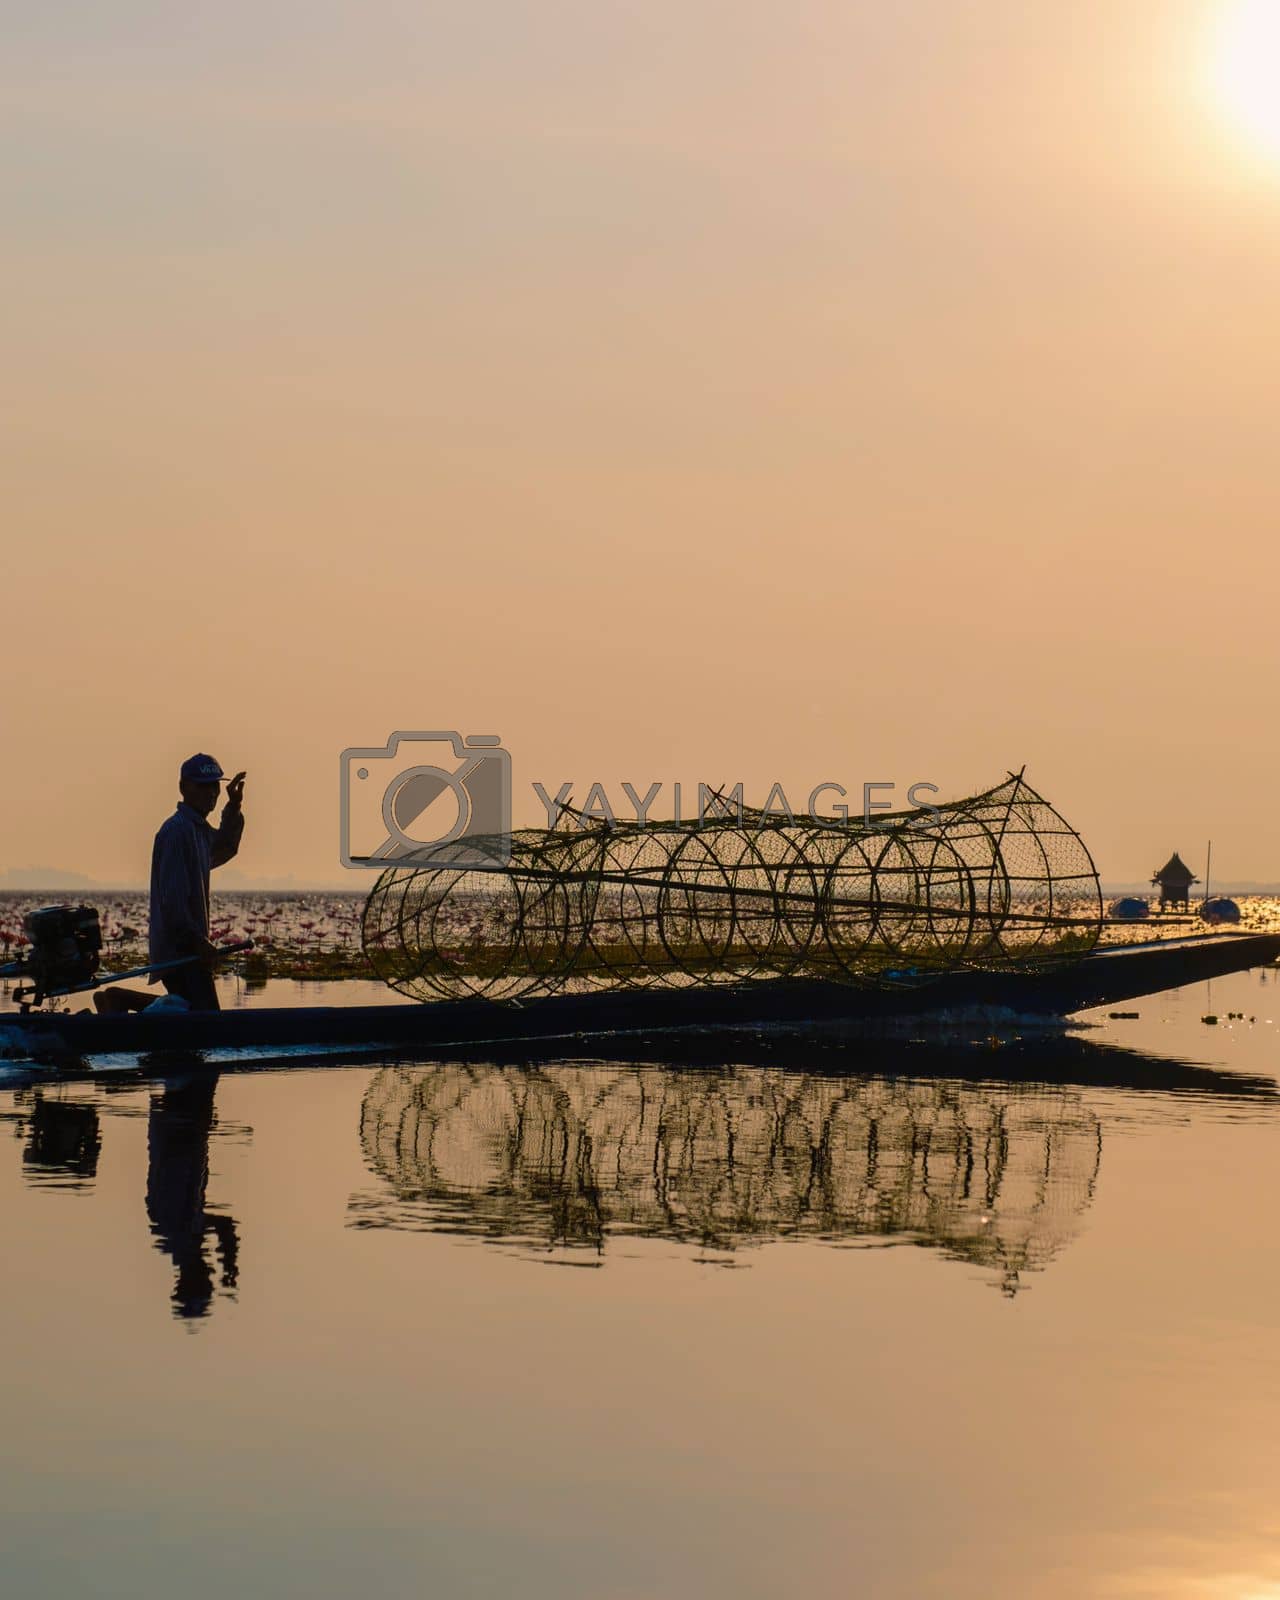 Royalty free image of Sunrise at the The sea of red lotus, Lake Nong Harn, Udon Thani, Thailand by fokkebok